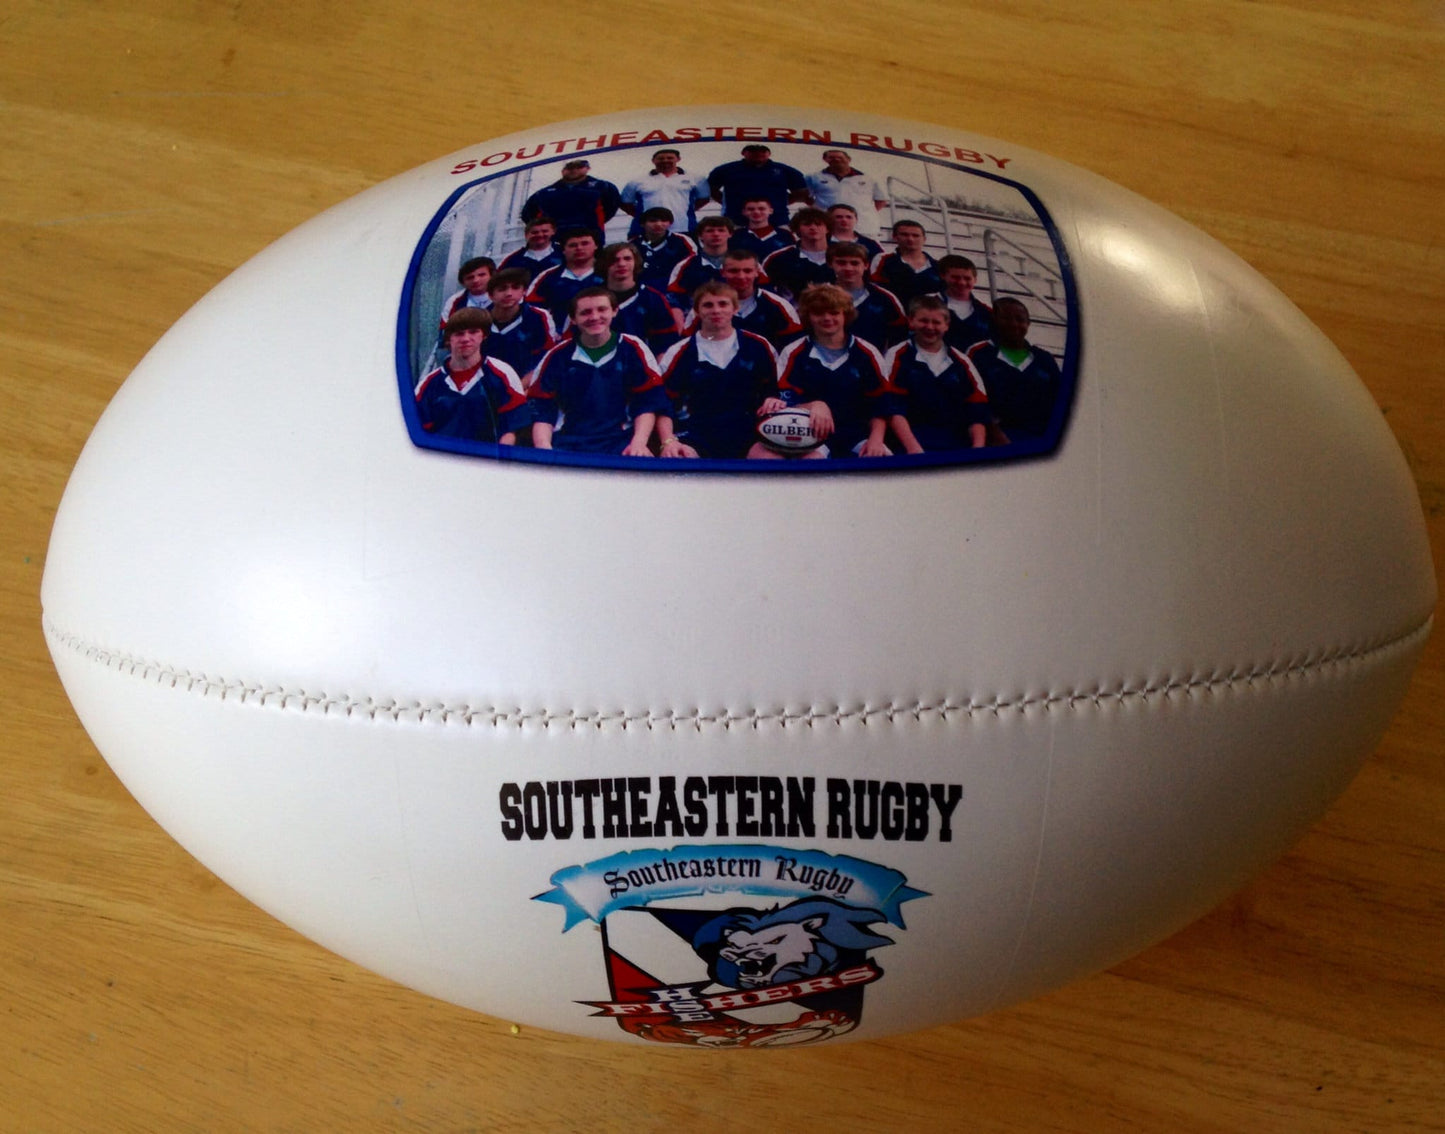 Personalized Rugby Balls for Coaches' Gifts, Rugby Players' Gifts, Senior Gifts, Player Gifts, Weddings, Holidays and Birthday Gifts